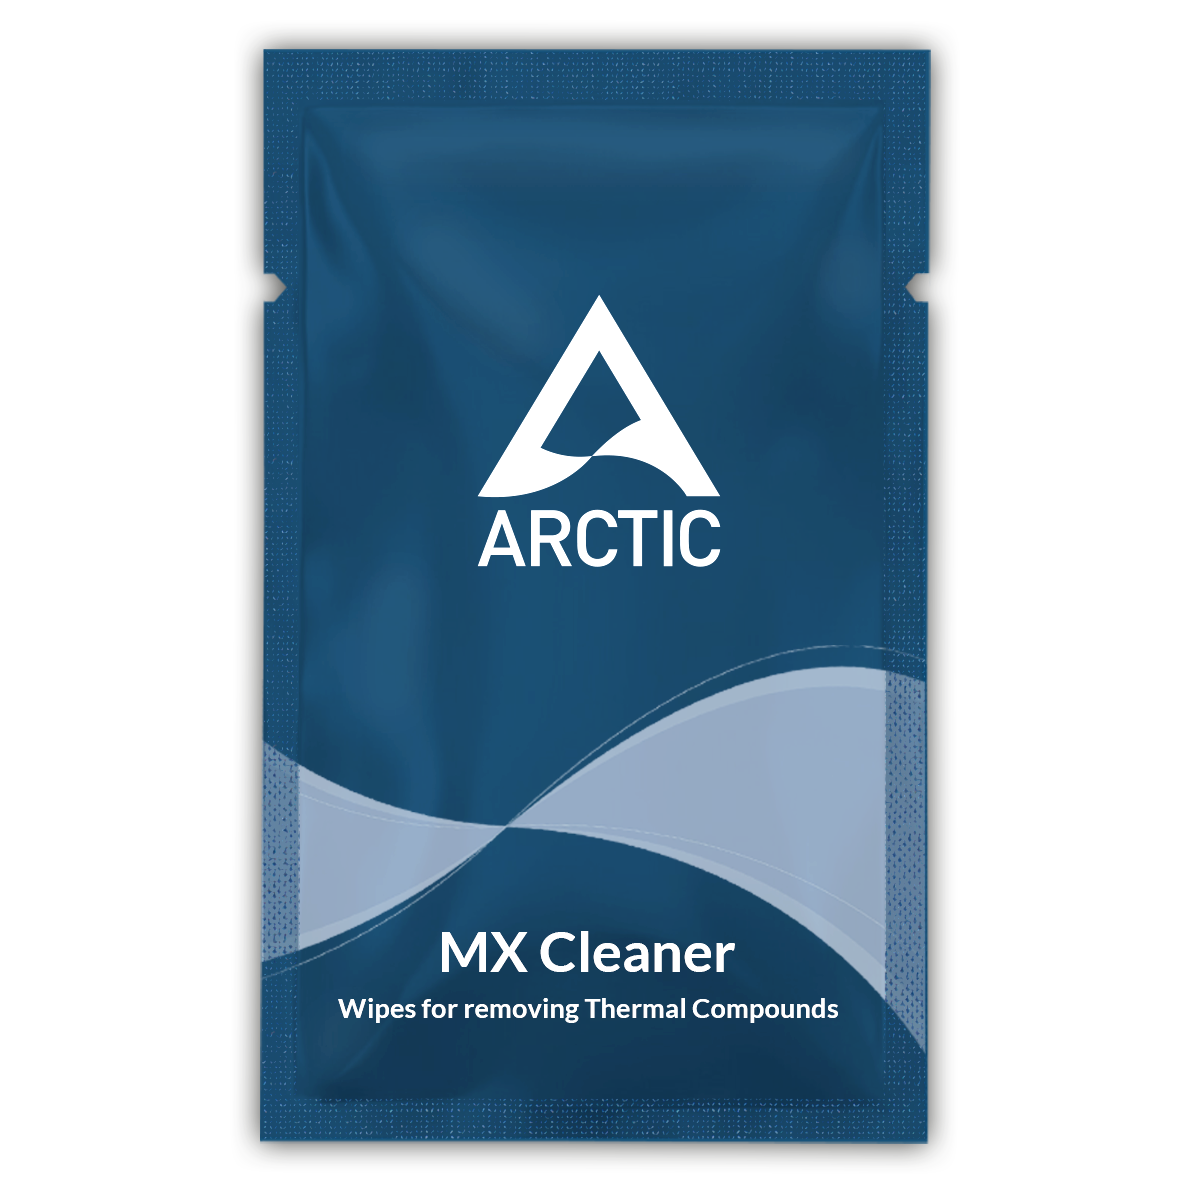  ARCTIC MX-6 (4 g, incl. 6 MX Cleaner) - Ultimate